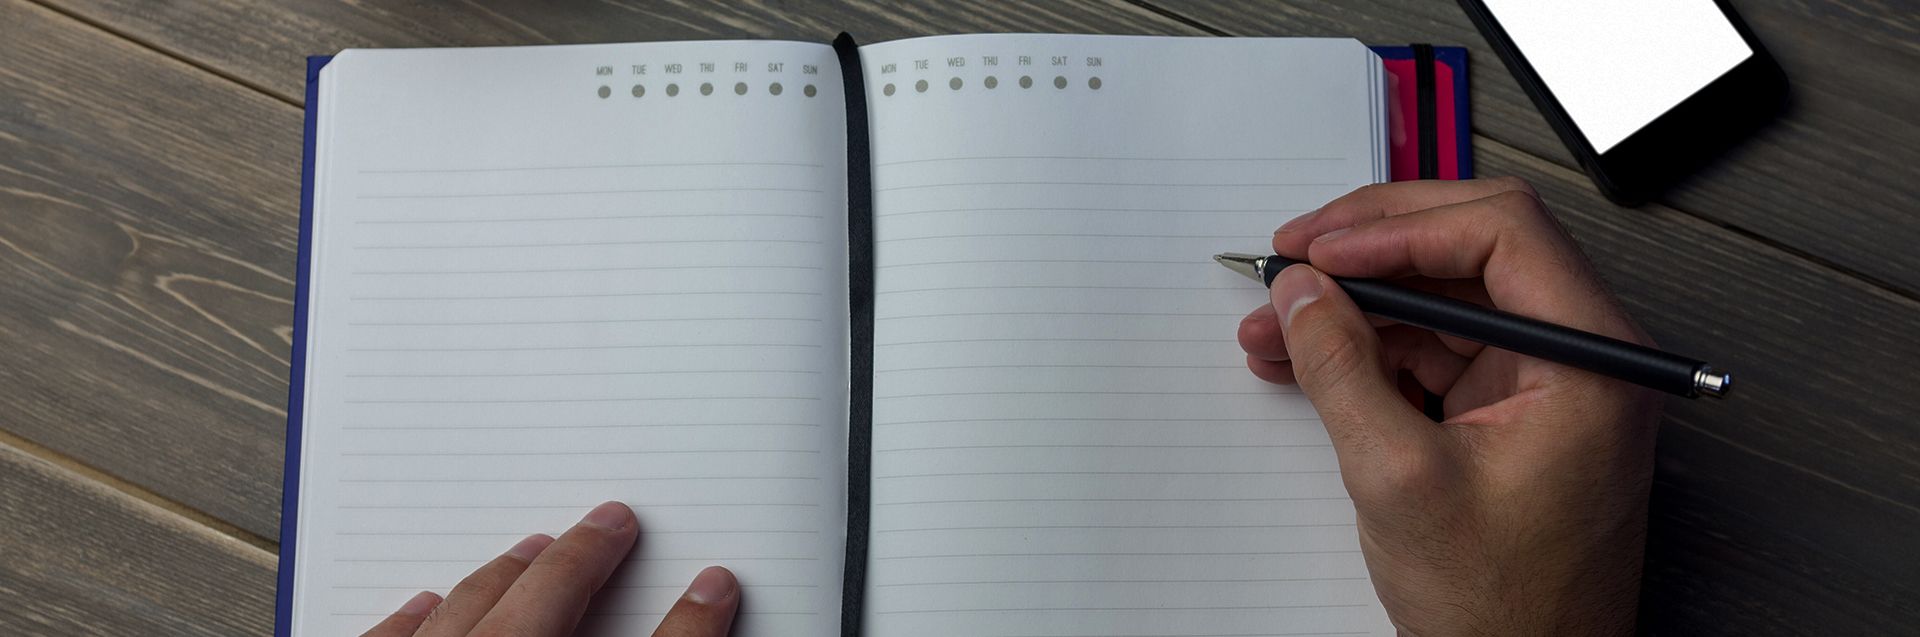 Person writing on a diary at the desk